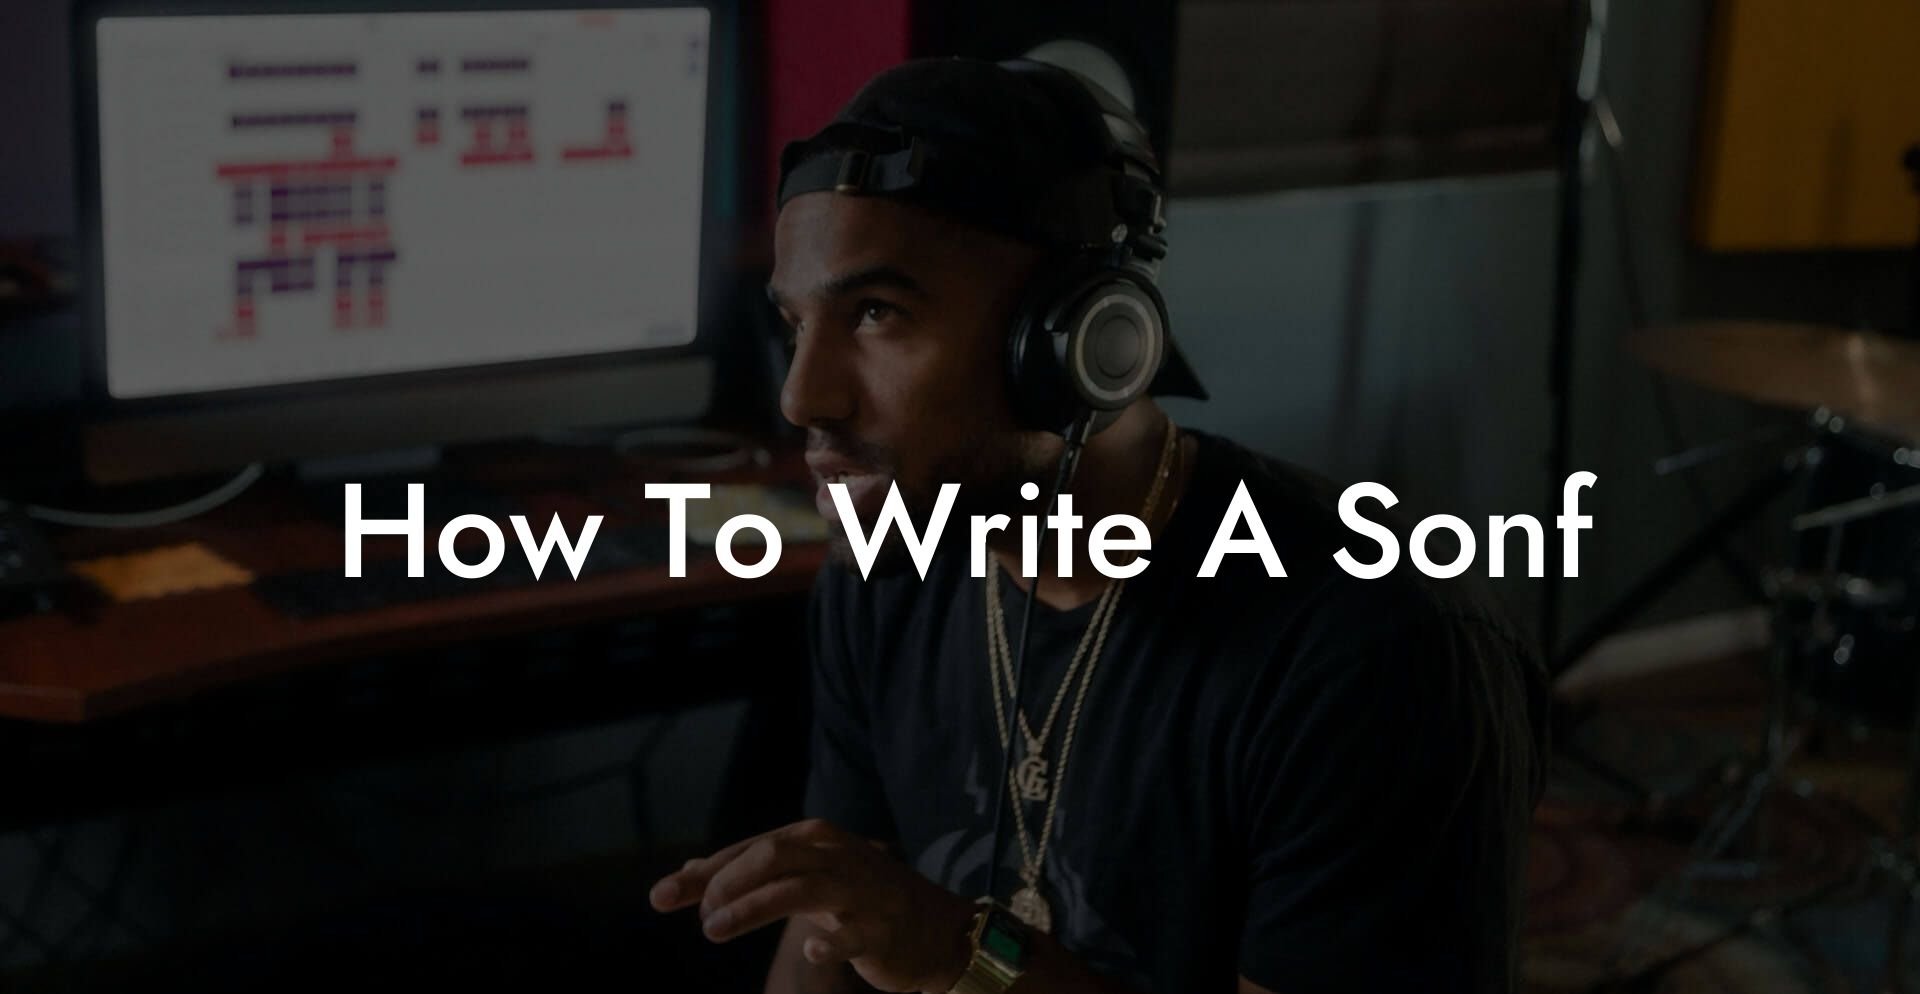 how to write a sonf lyric assistant